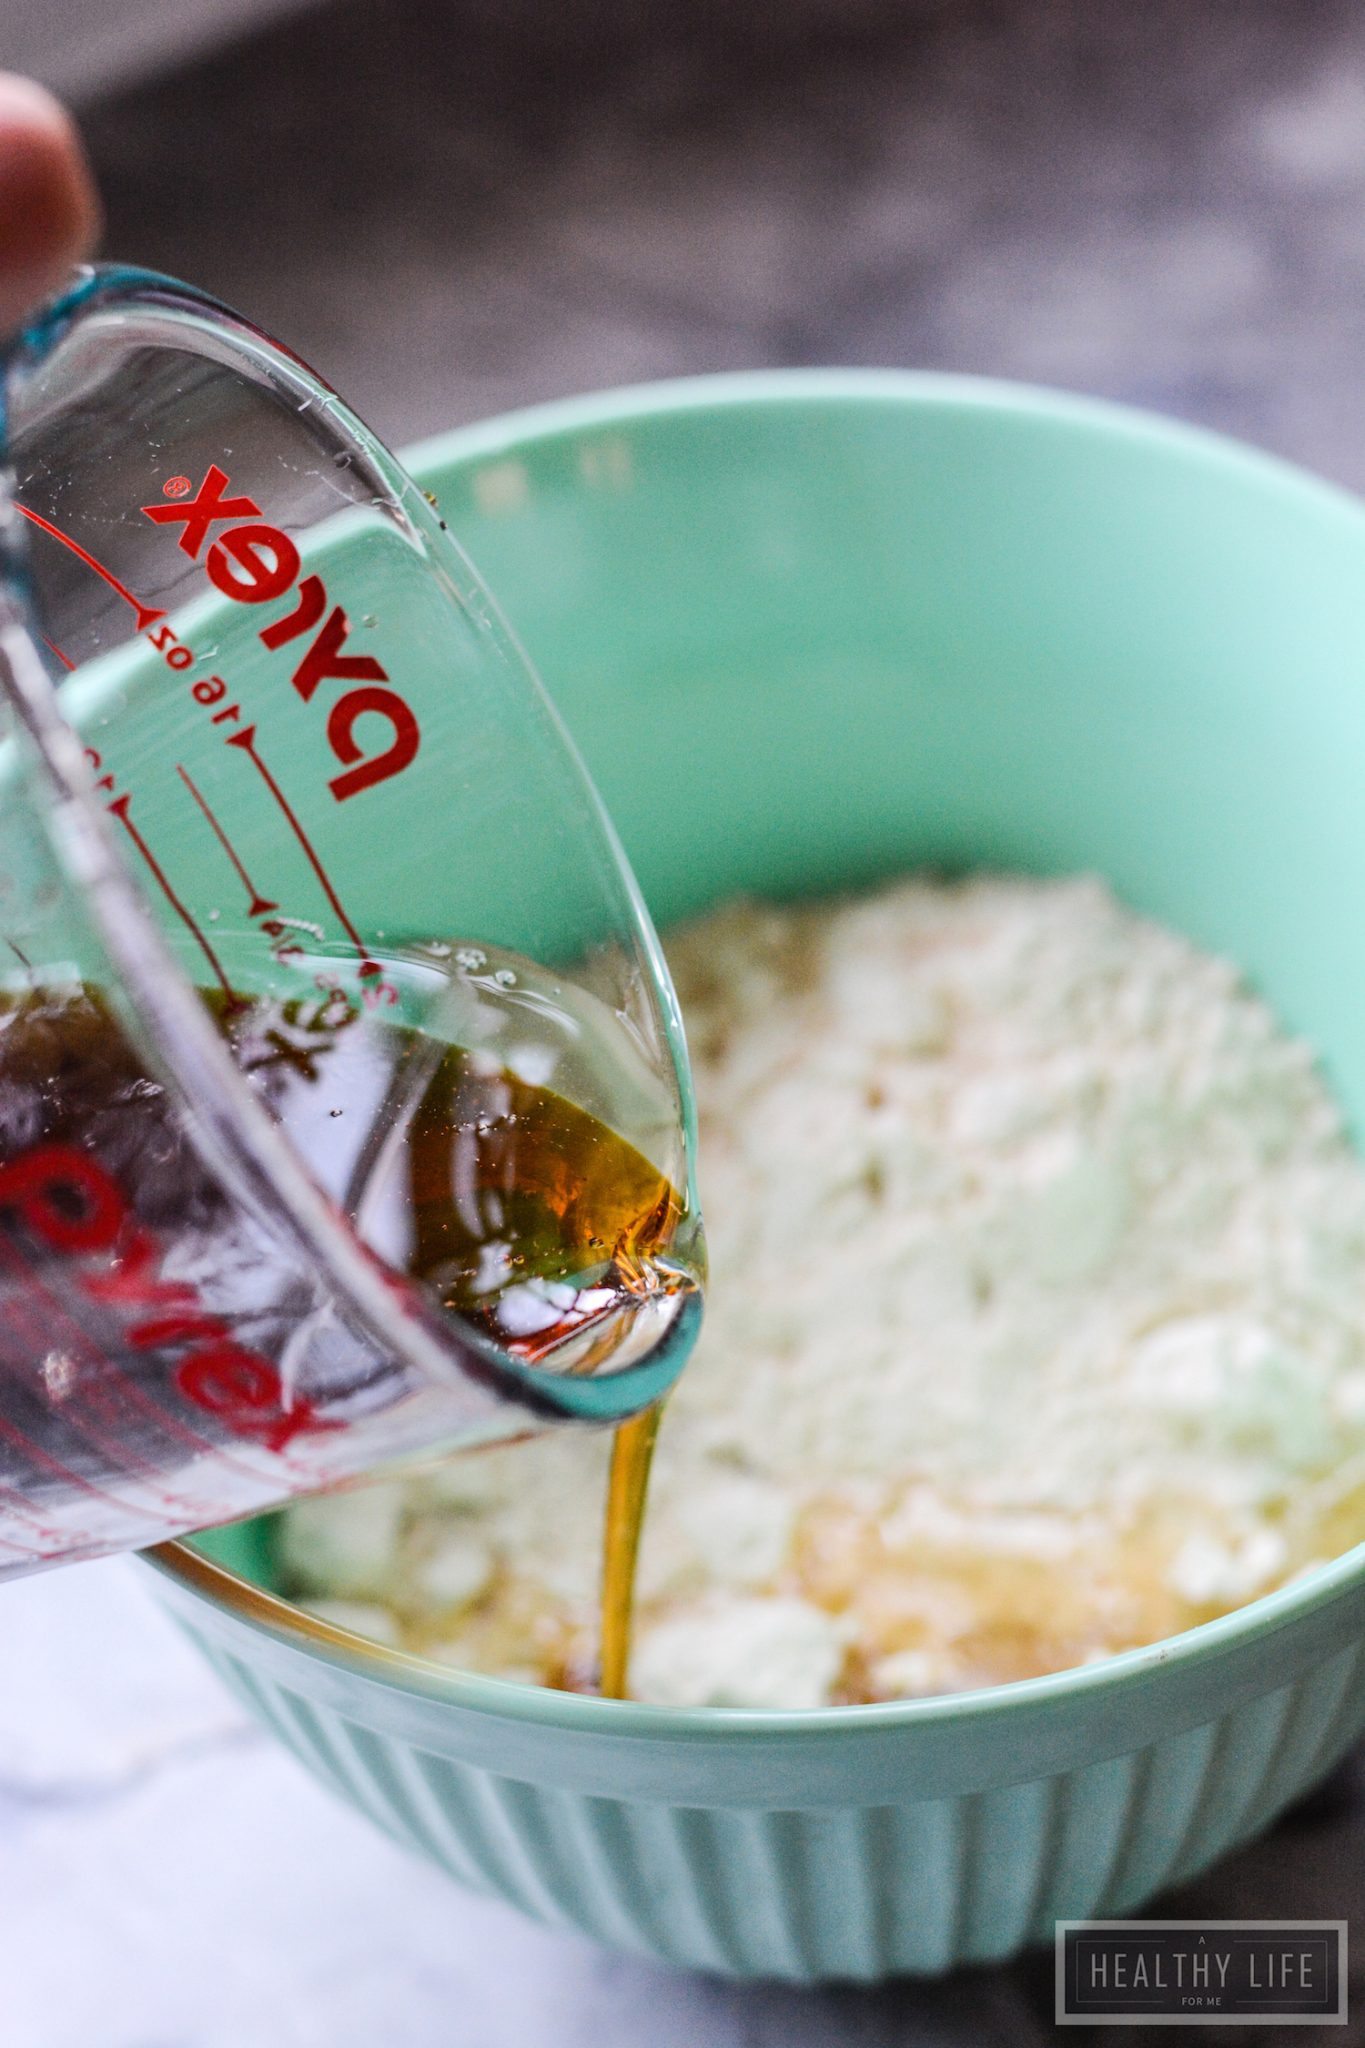 Pouring maple syrup into the dry ingredients.